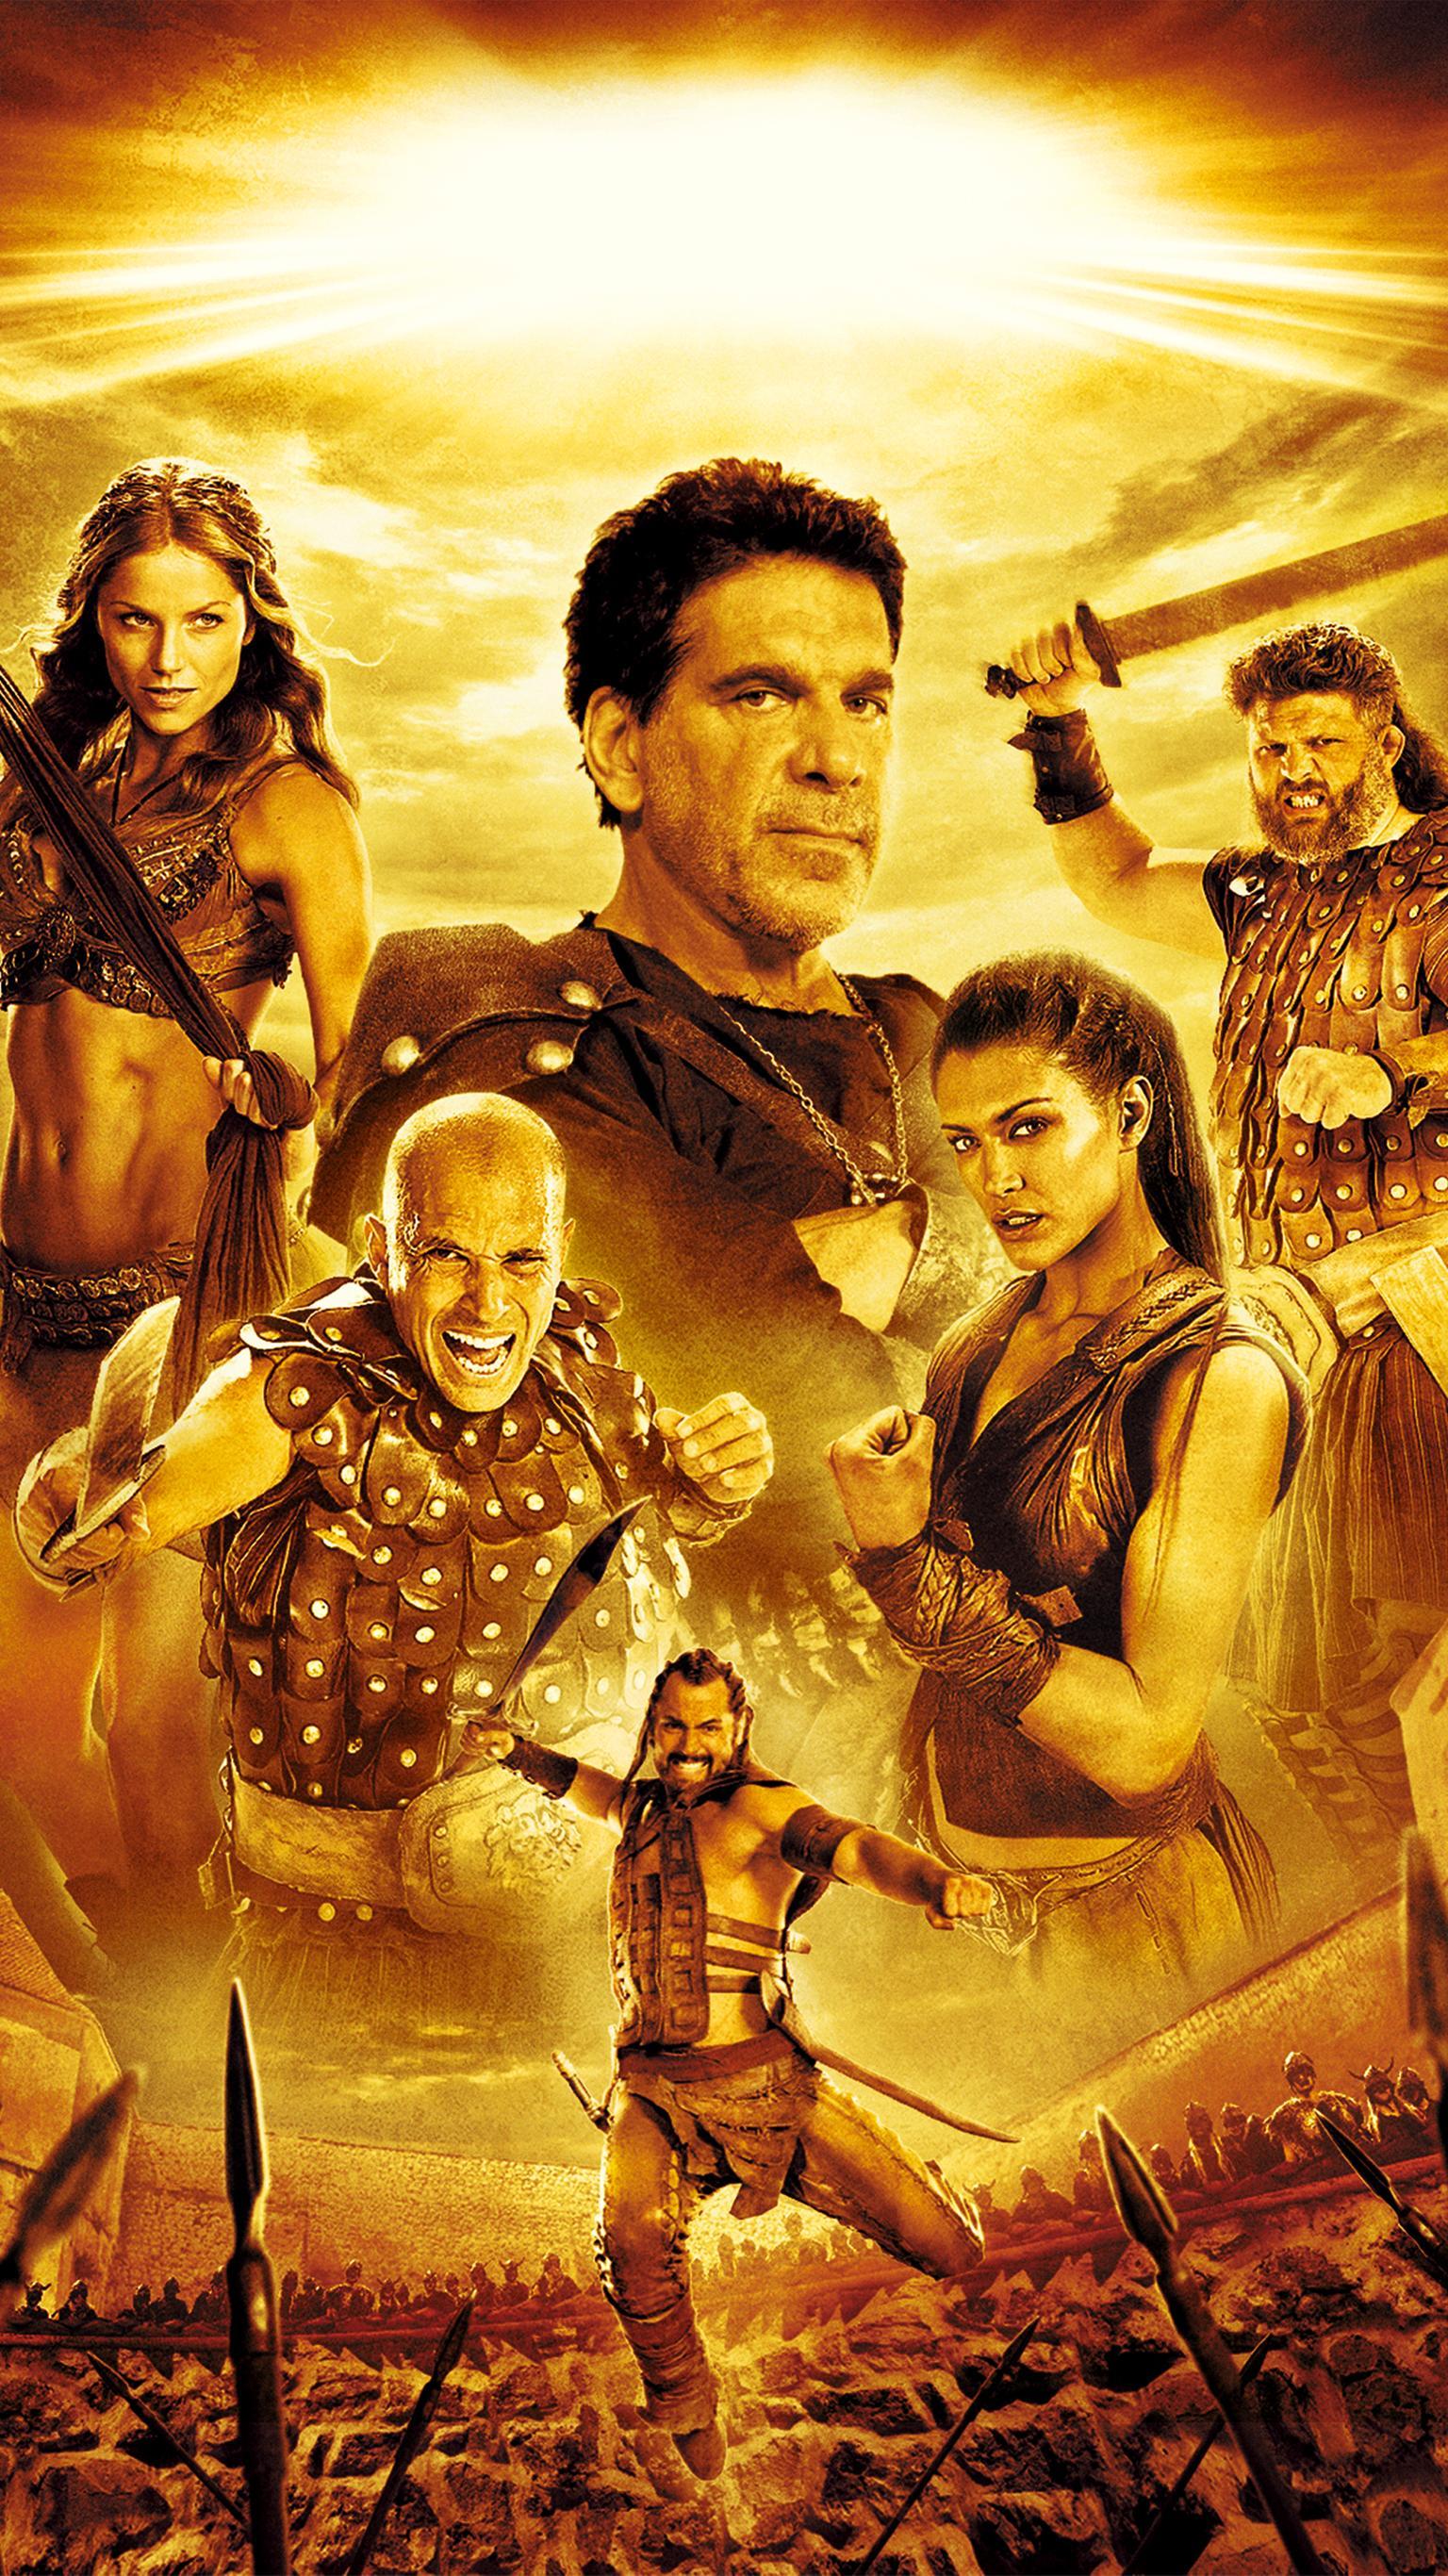 The Scorpion King: Quest for Power (2015) Phone Wallpaper